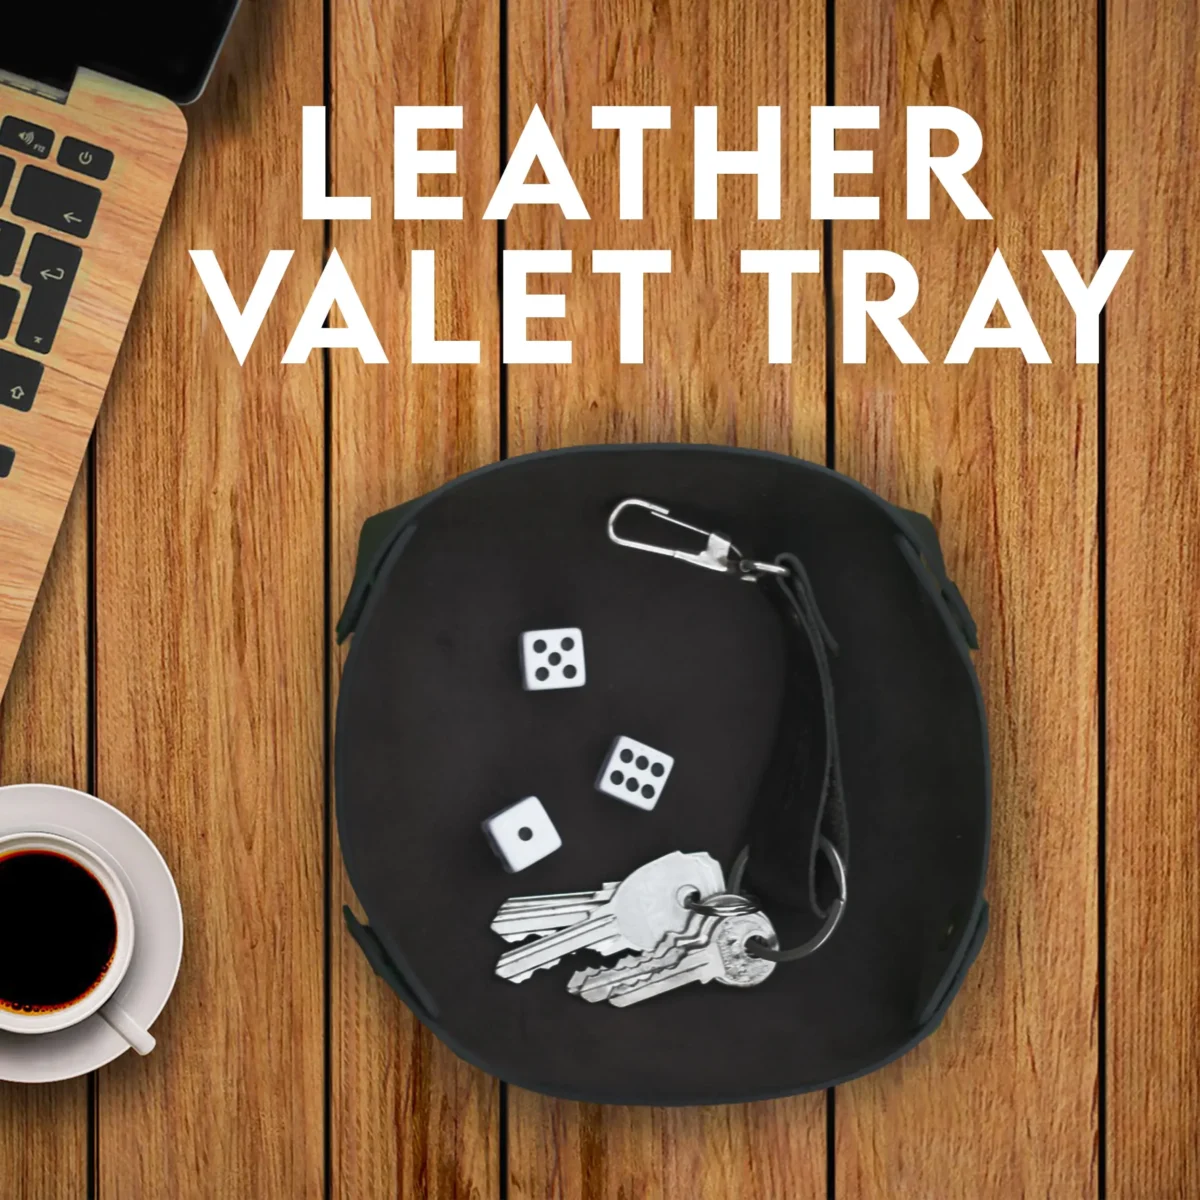 chocolate brown leather valet tray, genuine cowhide leather valet tray